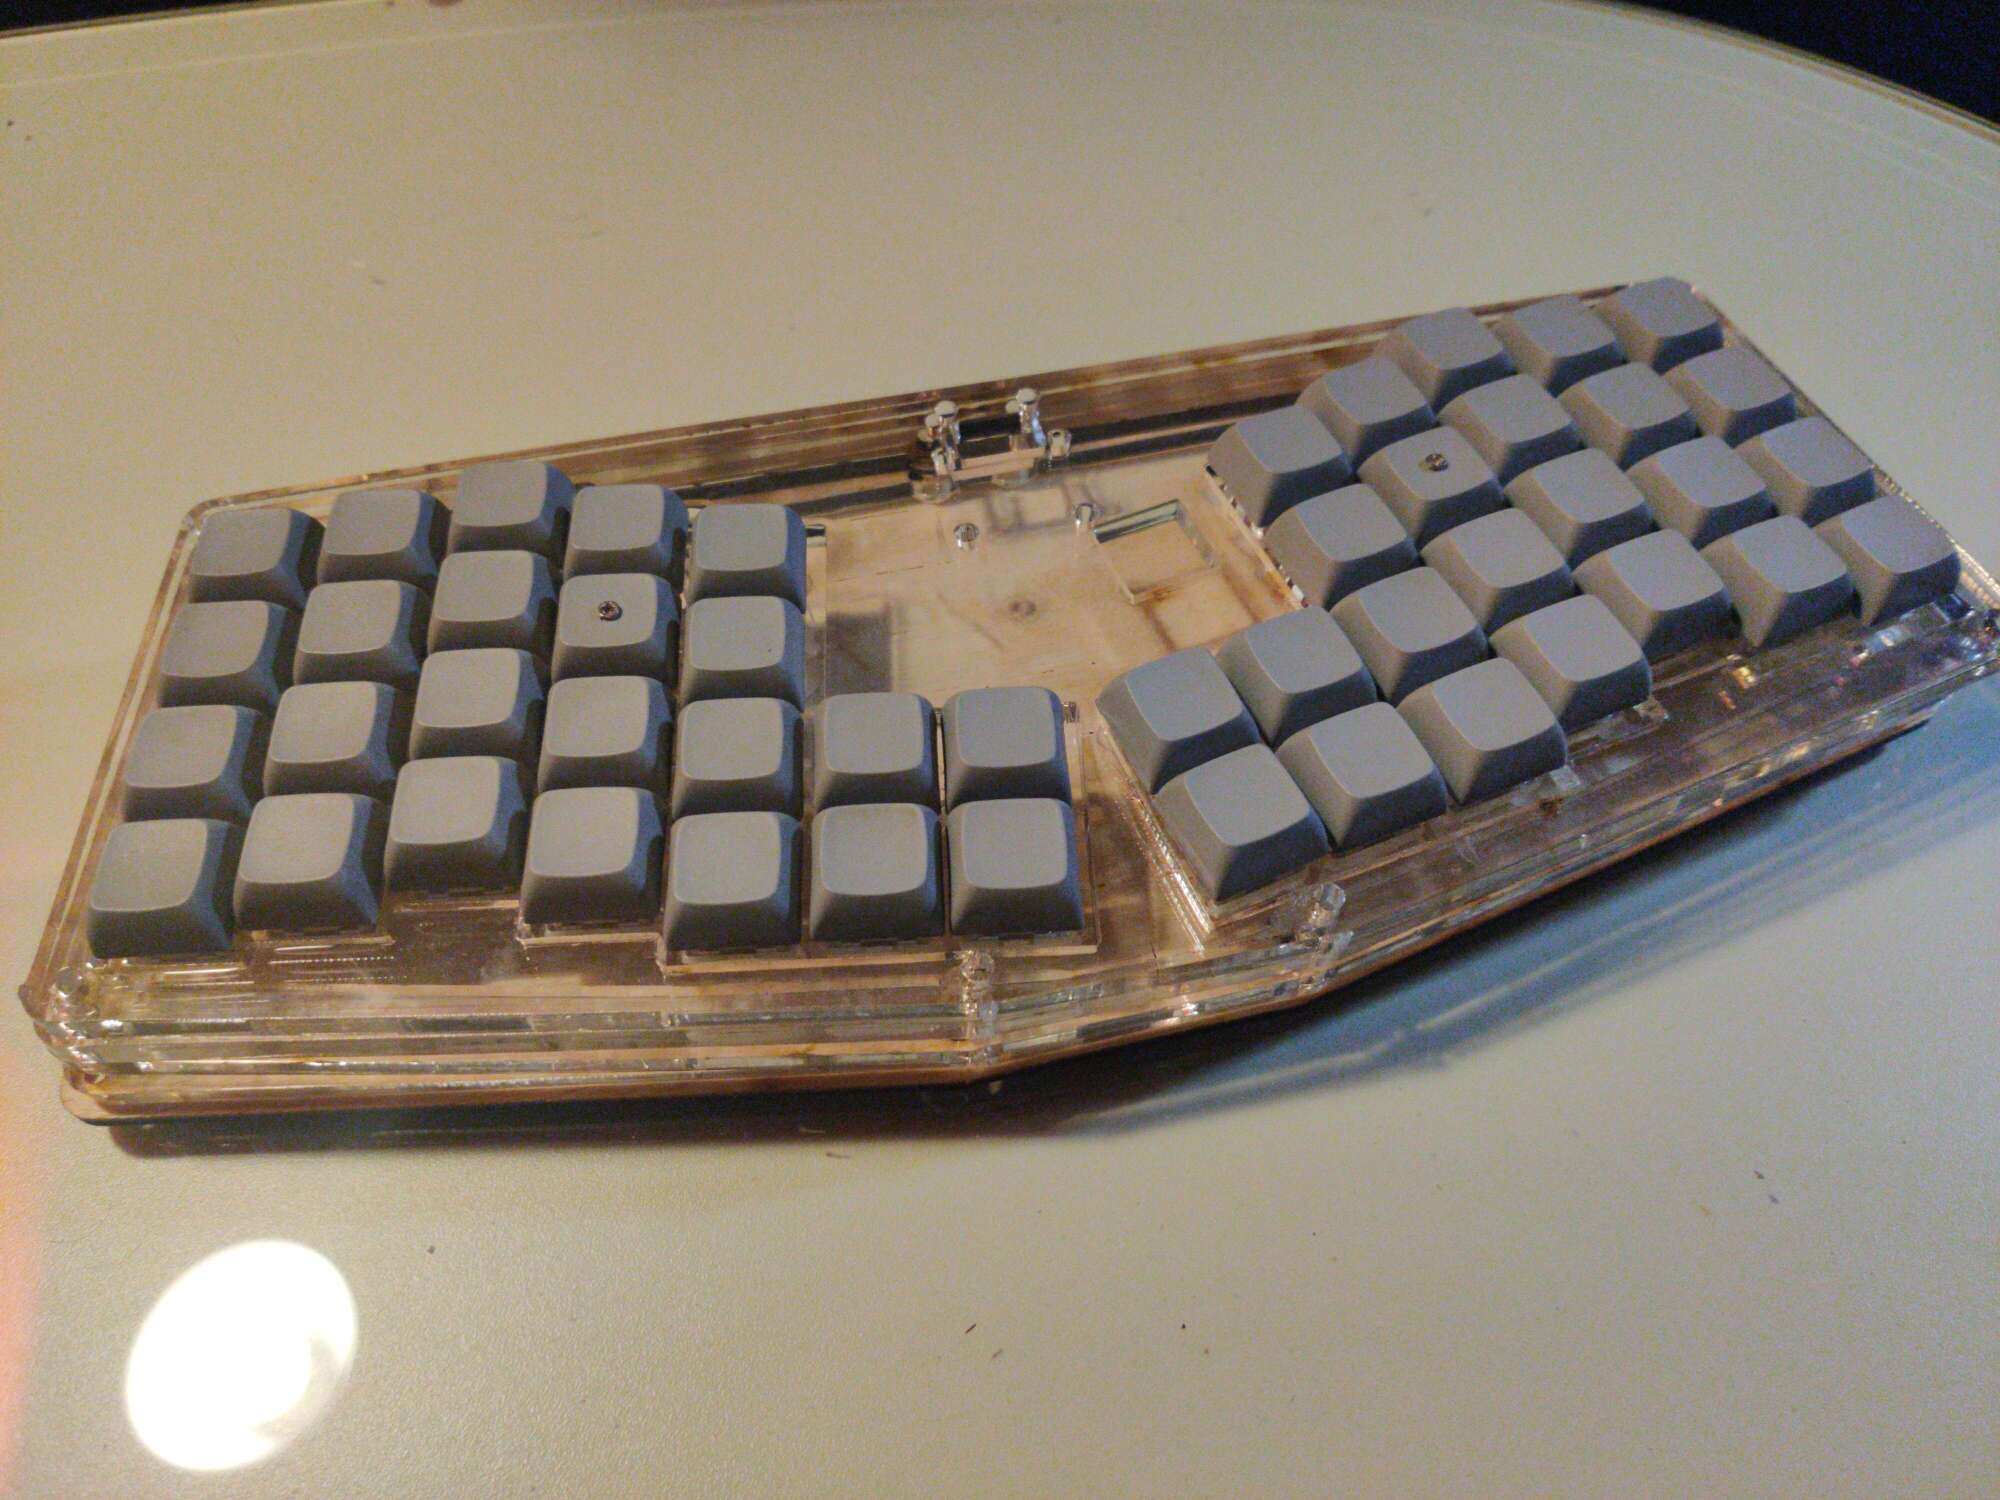 Picture of the in-progress atreides keyboard